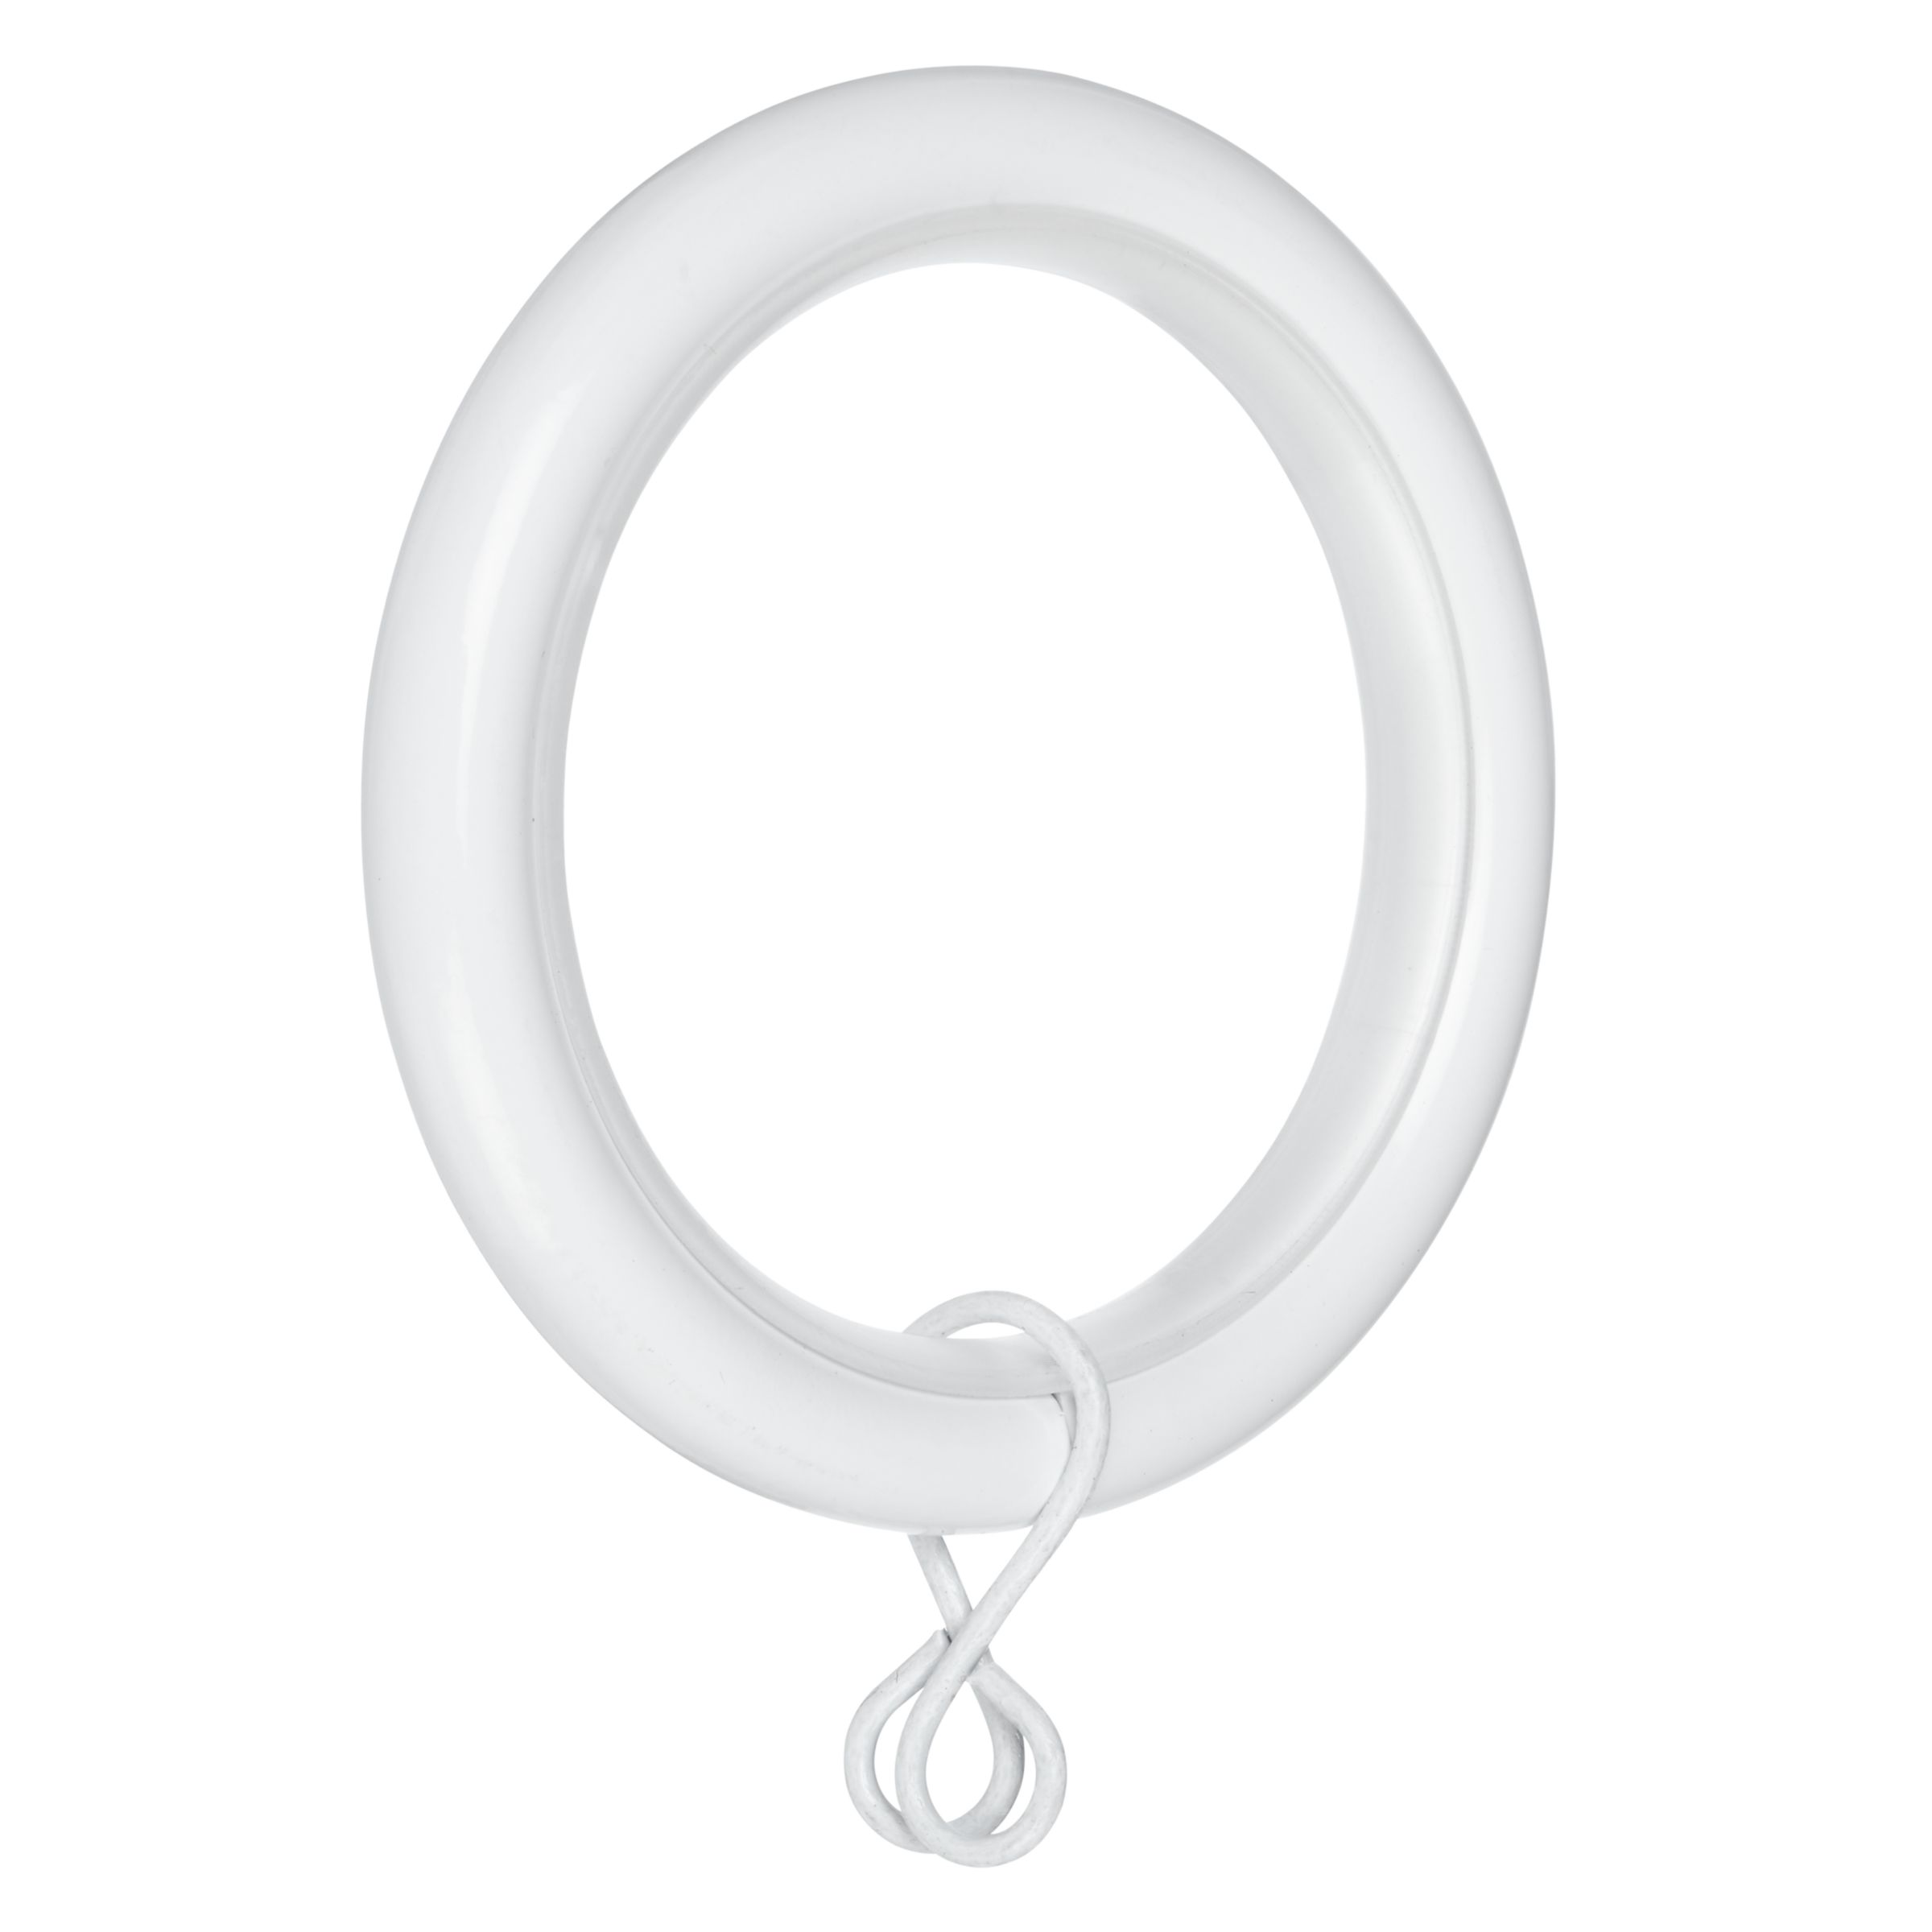 John Lewis & Partners Extendable Curtain Rings, Dia.16/19mm, Pack of 6